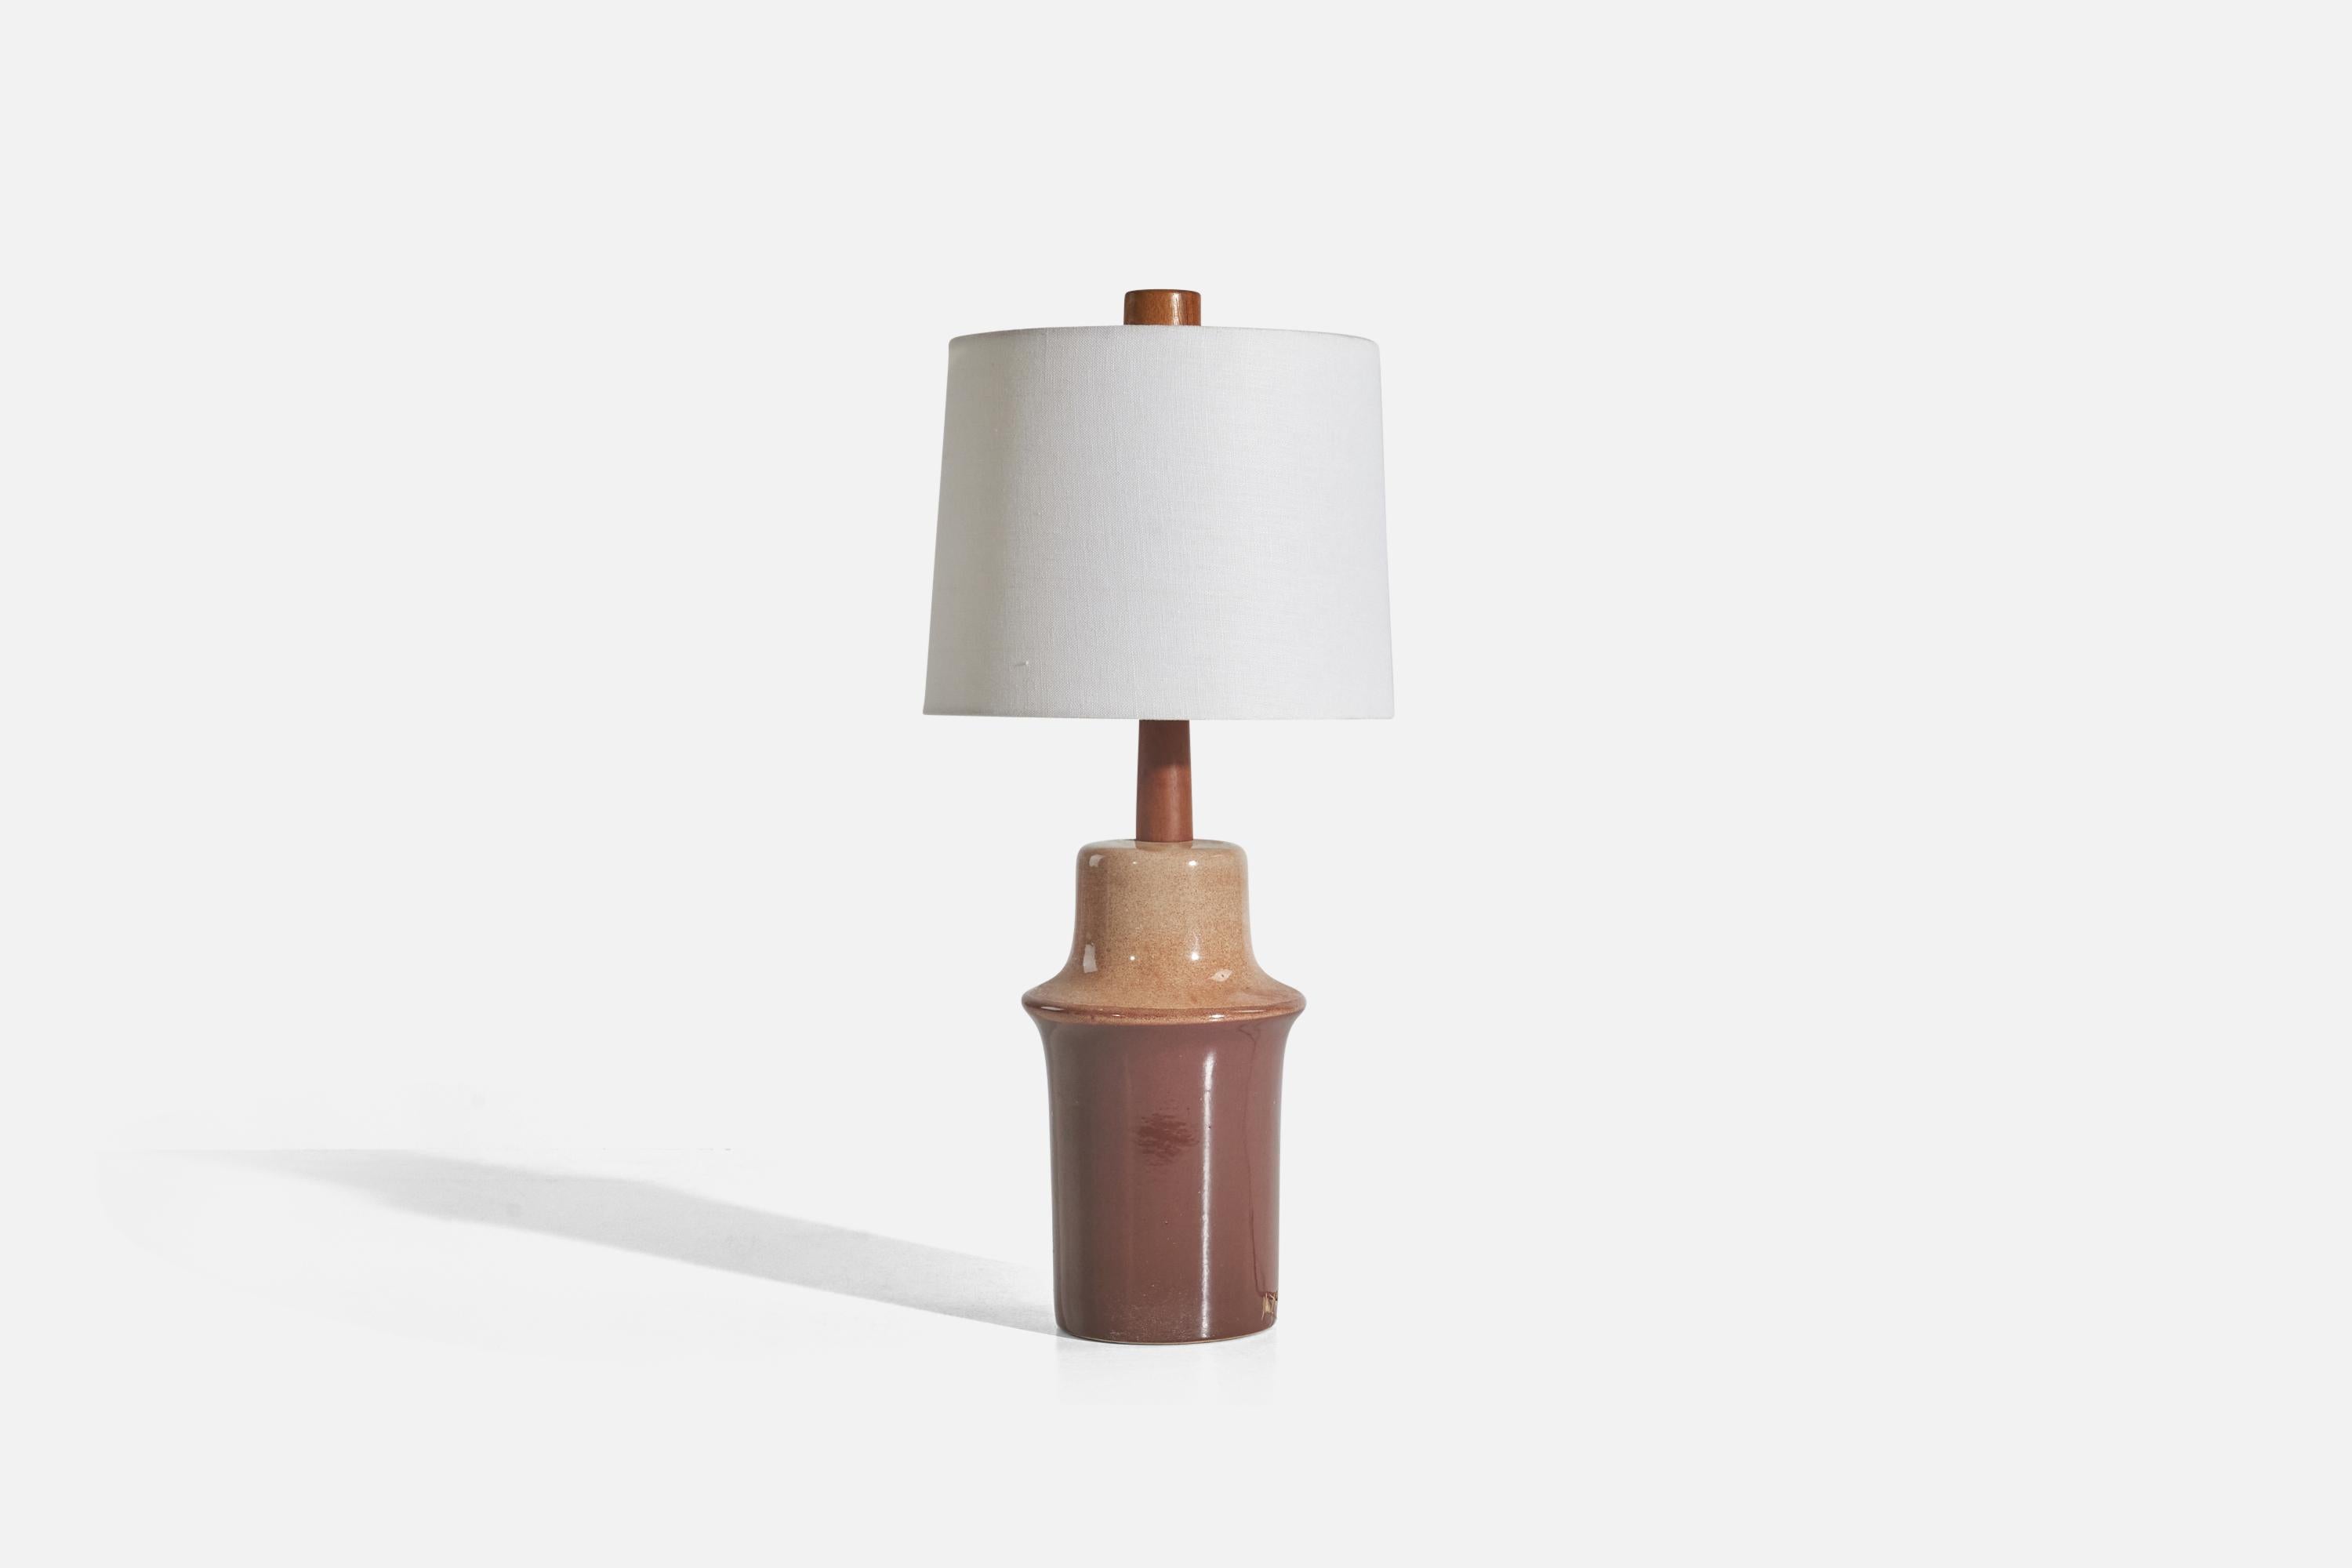 A brown and beige ceramic and walnut table lamp designed by Jane & Gordon Martz and produced by Marshall Studios, Indianapolis, 1960s. 

Sold without Lampshade
Dimensions of Lamp (inches) : 16 x 6.18 x 6.18 (Height x Width x Depth)
Dimensions of